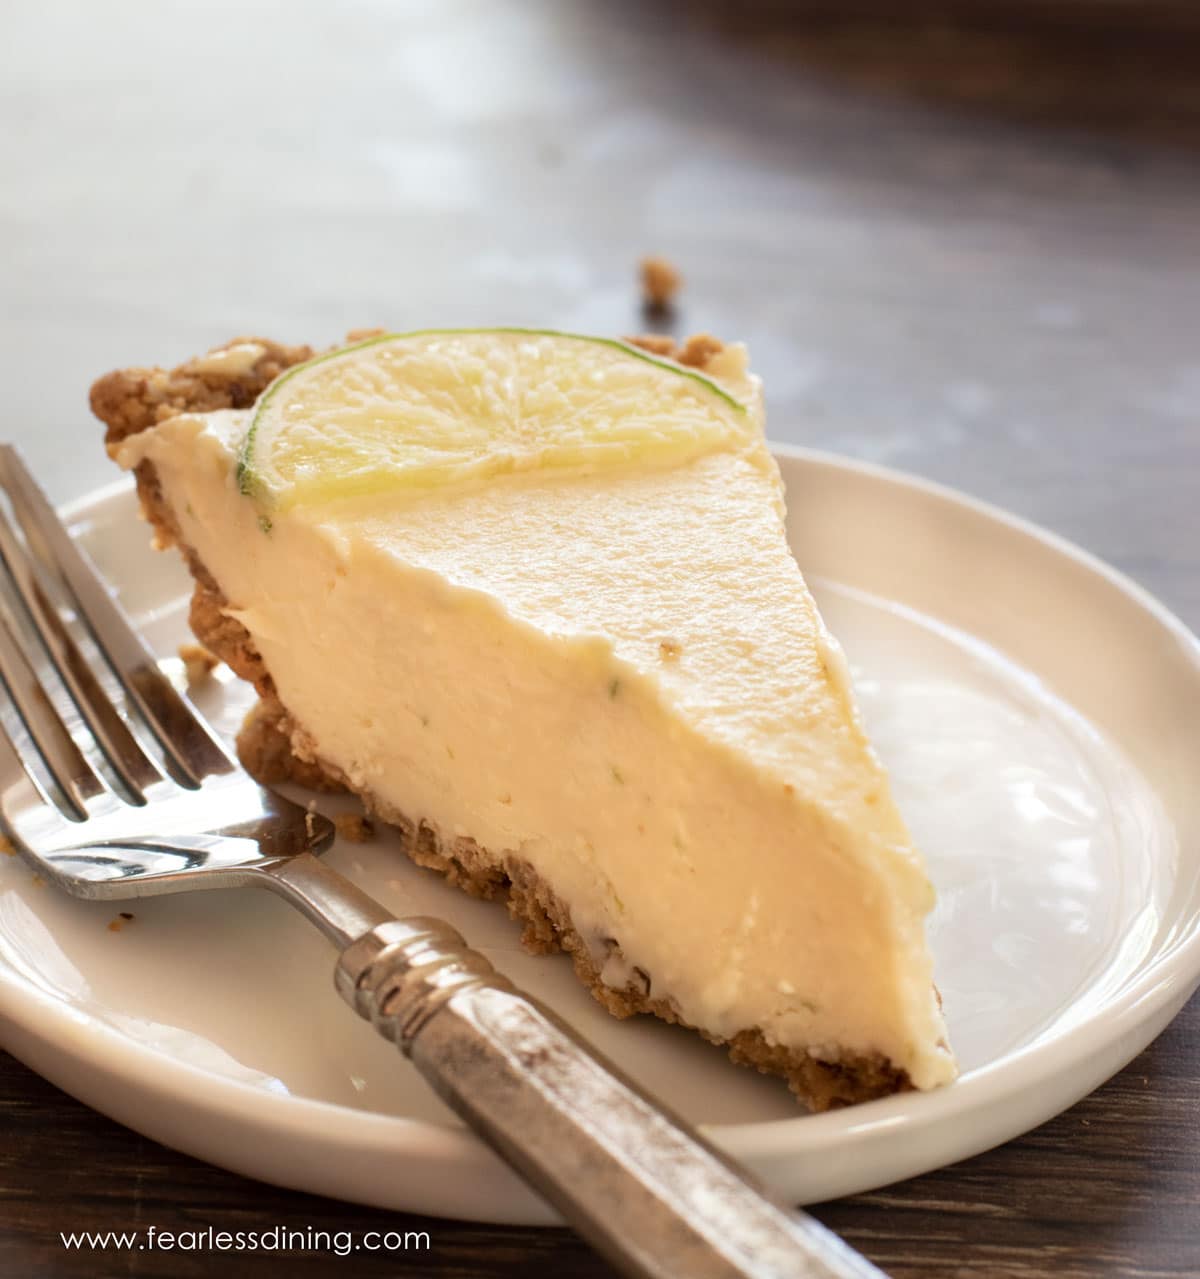 A slice of gluten free key lime pie on a plate.